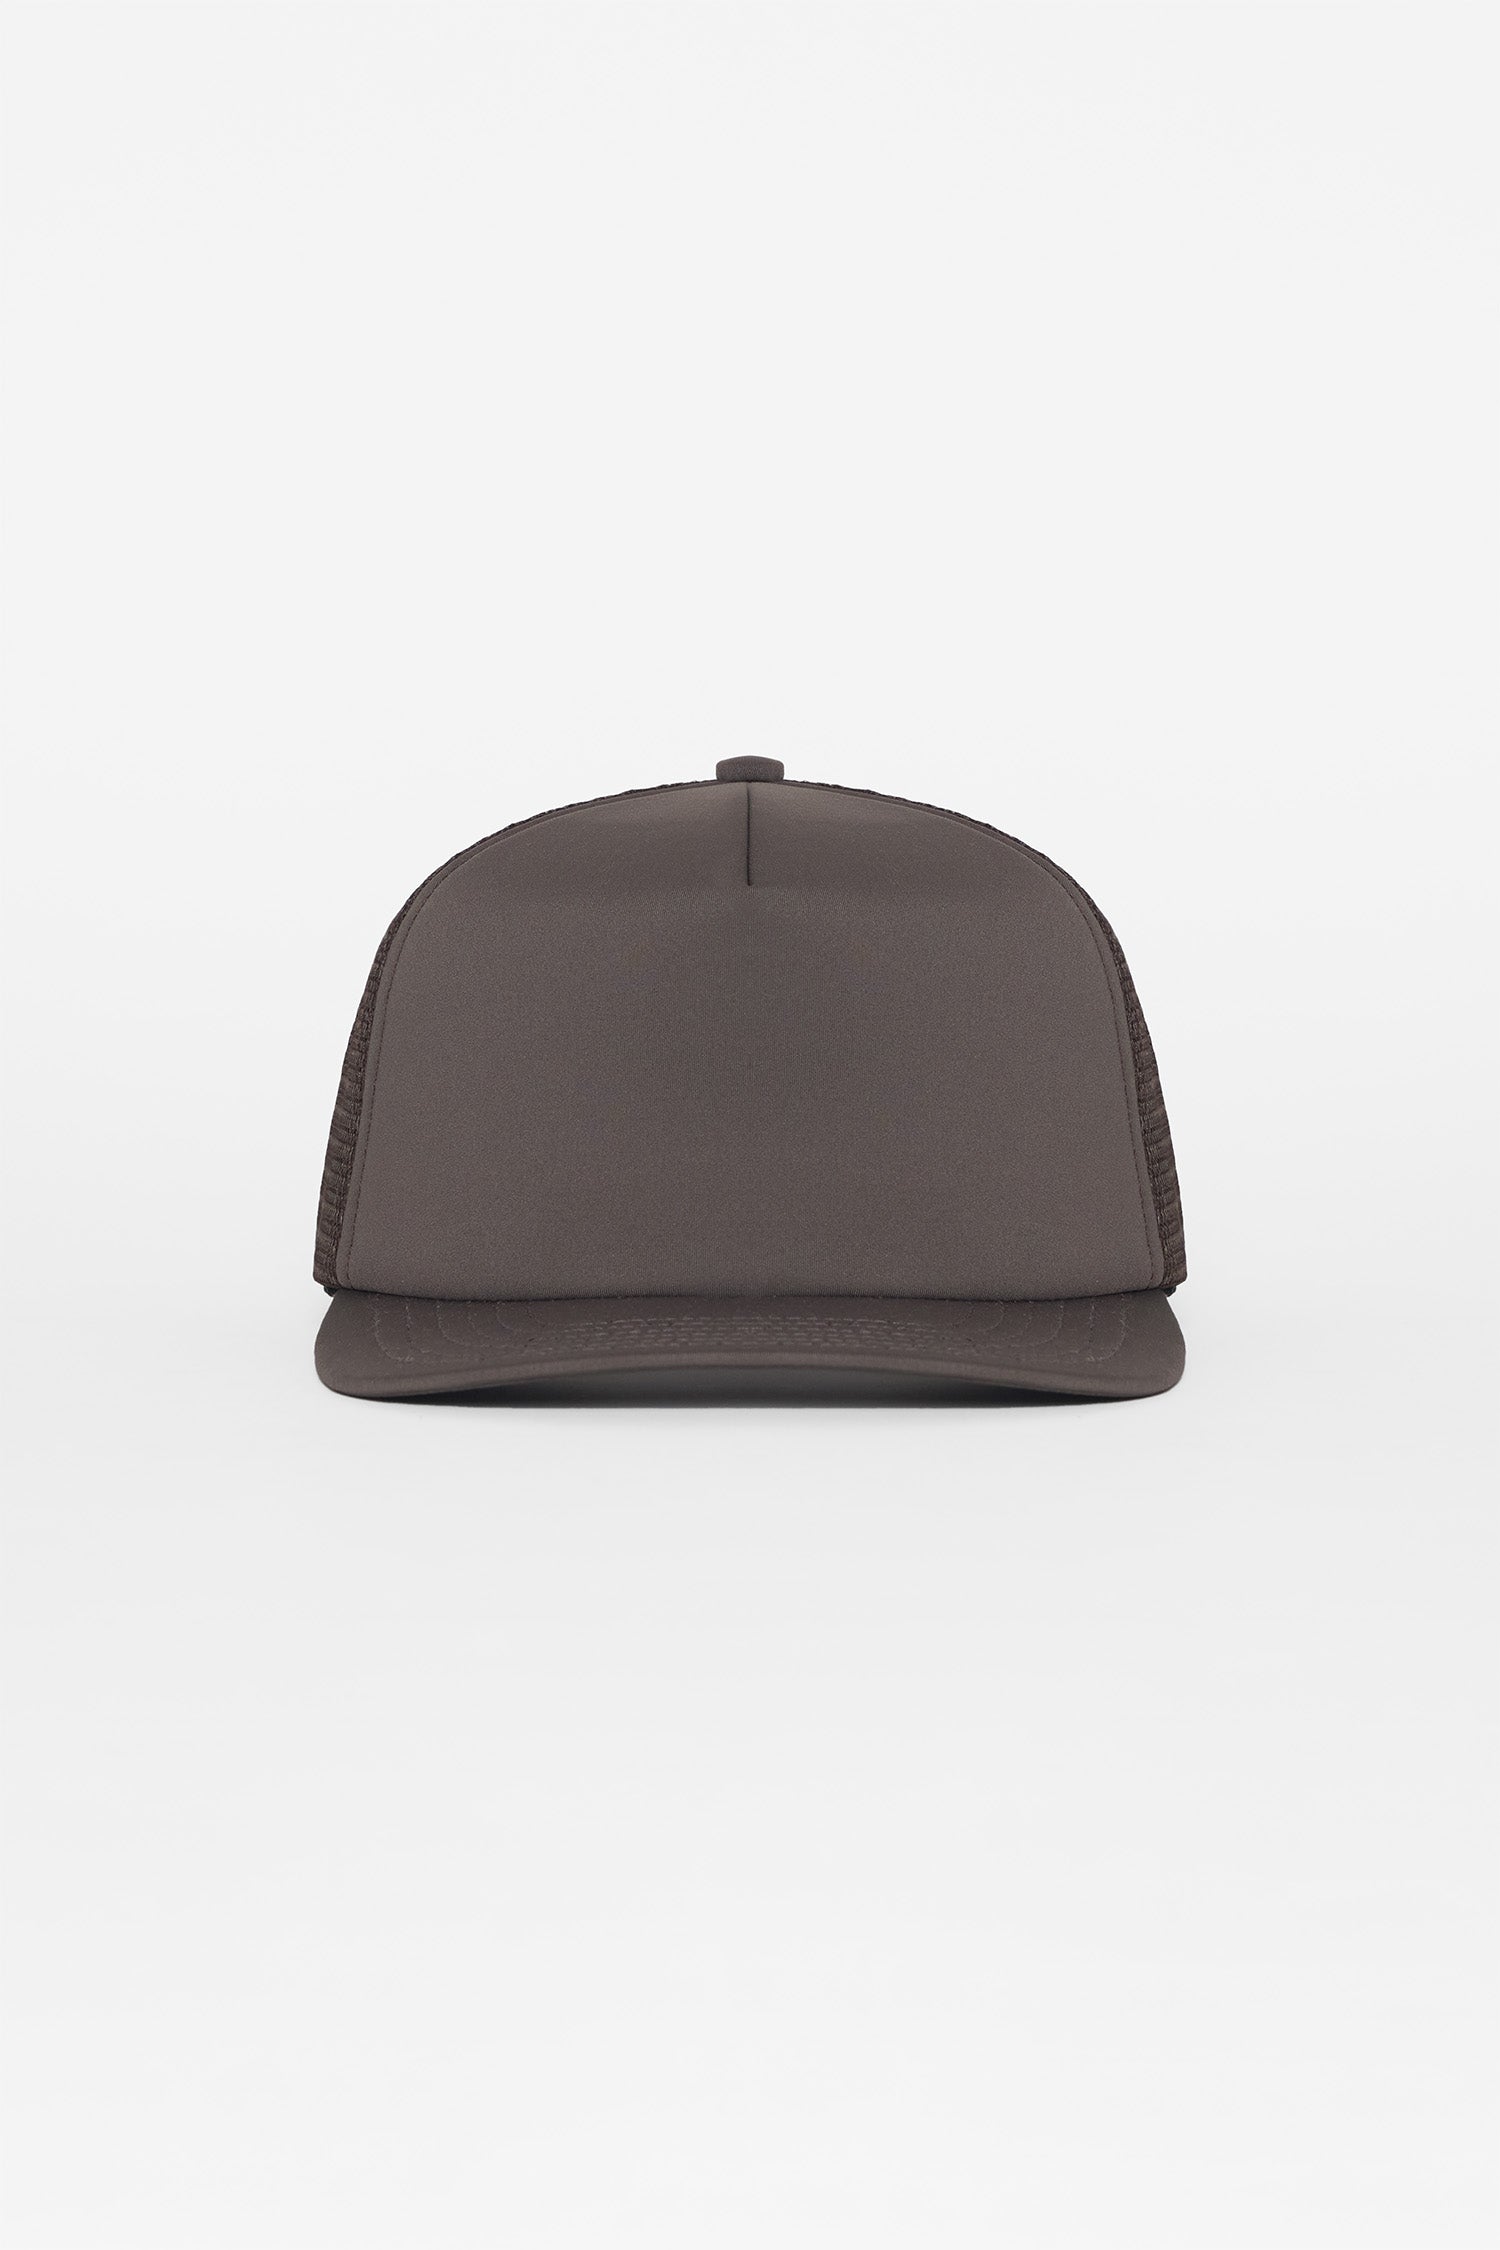 Collection Hats – Los Angeles Apparel - Japan